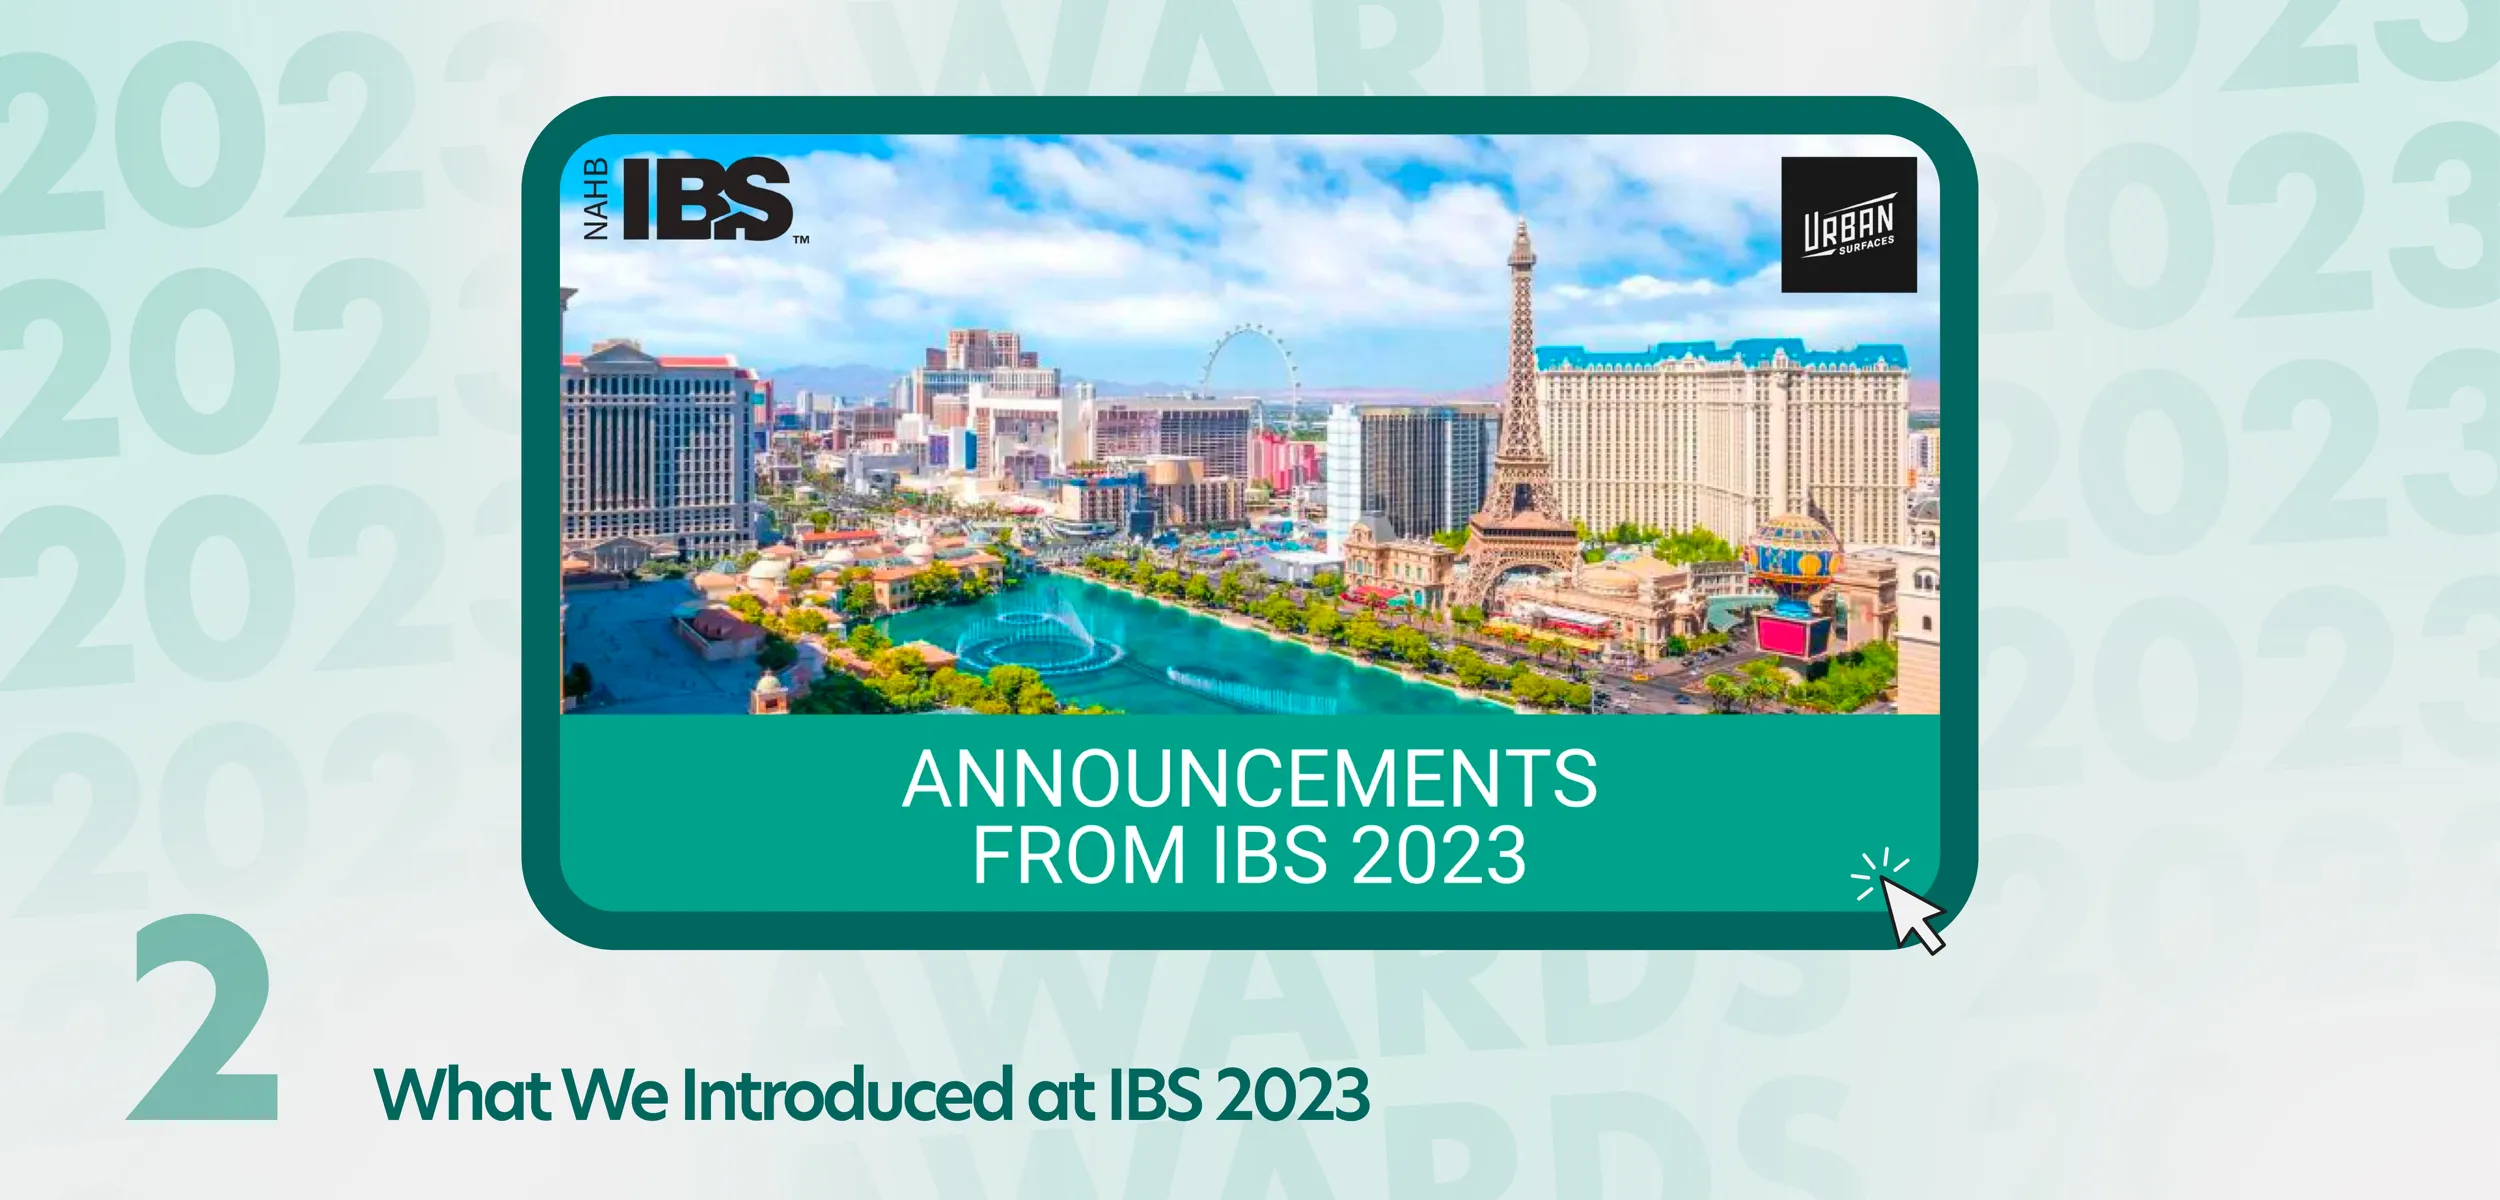 View of the Las Vegas strip. Title: Announcements from IBS 2023.